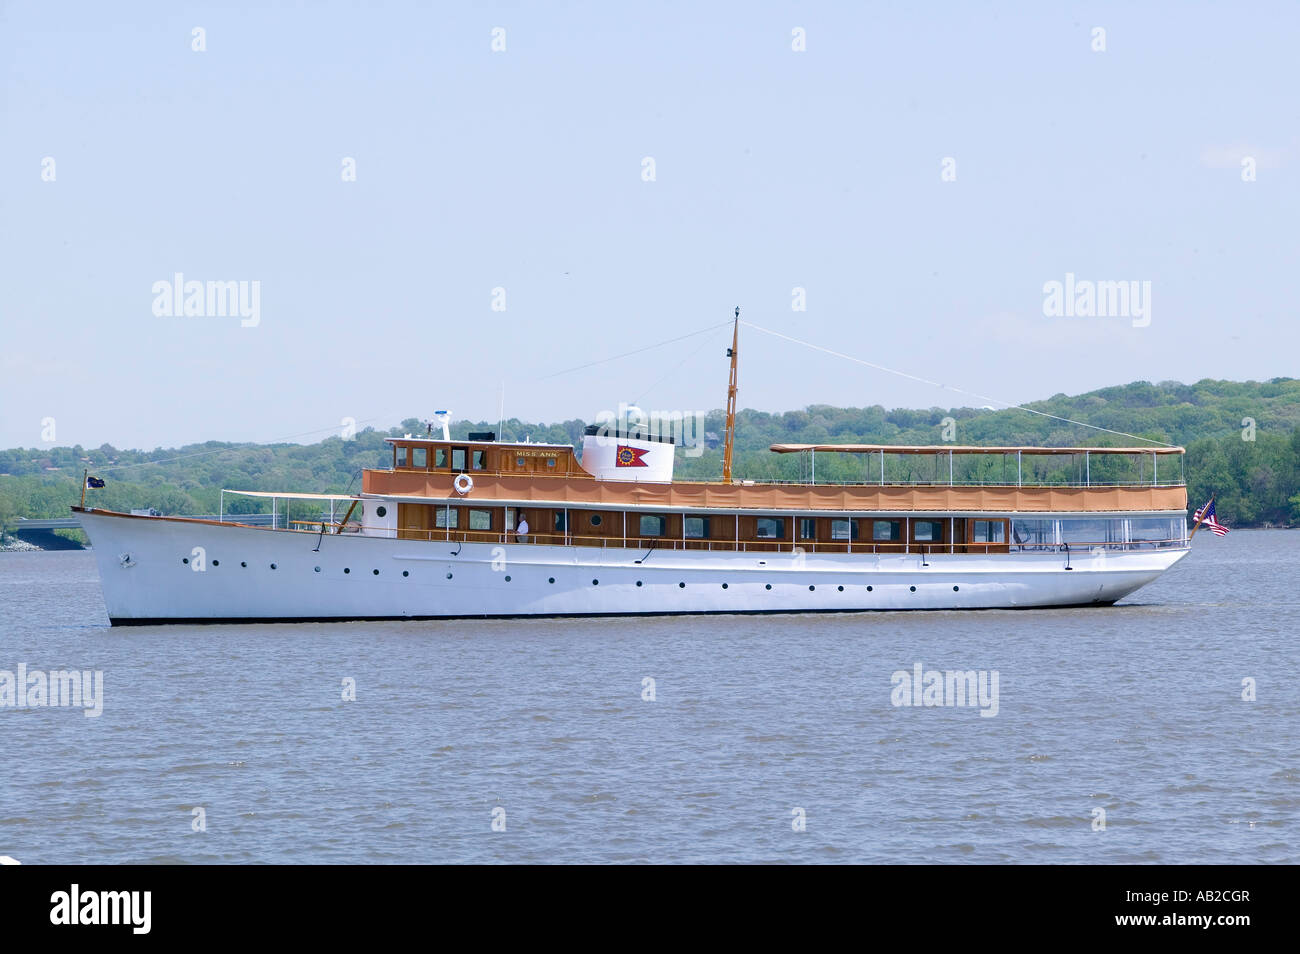 Sister of U S S Presidential Yacht Potomac on Potomac River the Floating White House from Alexandria Washington D C Stock Photo